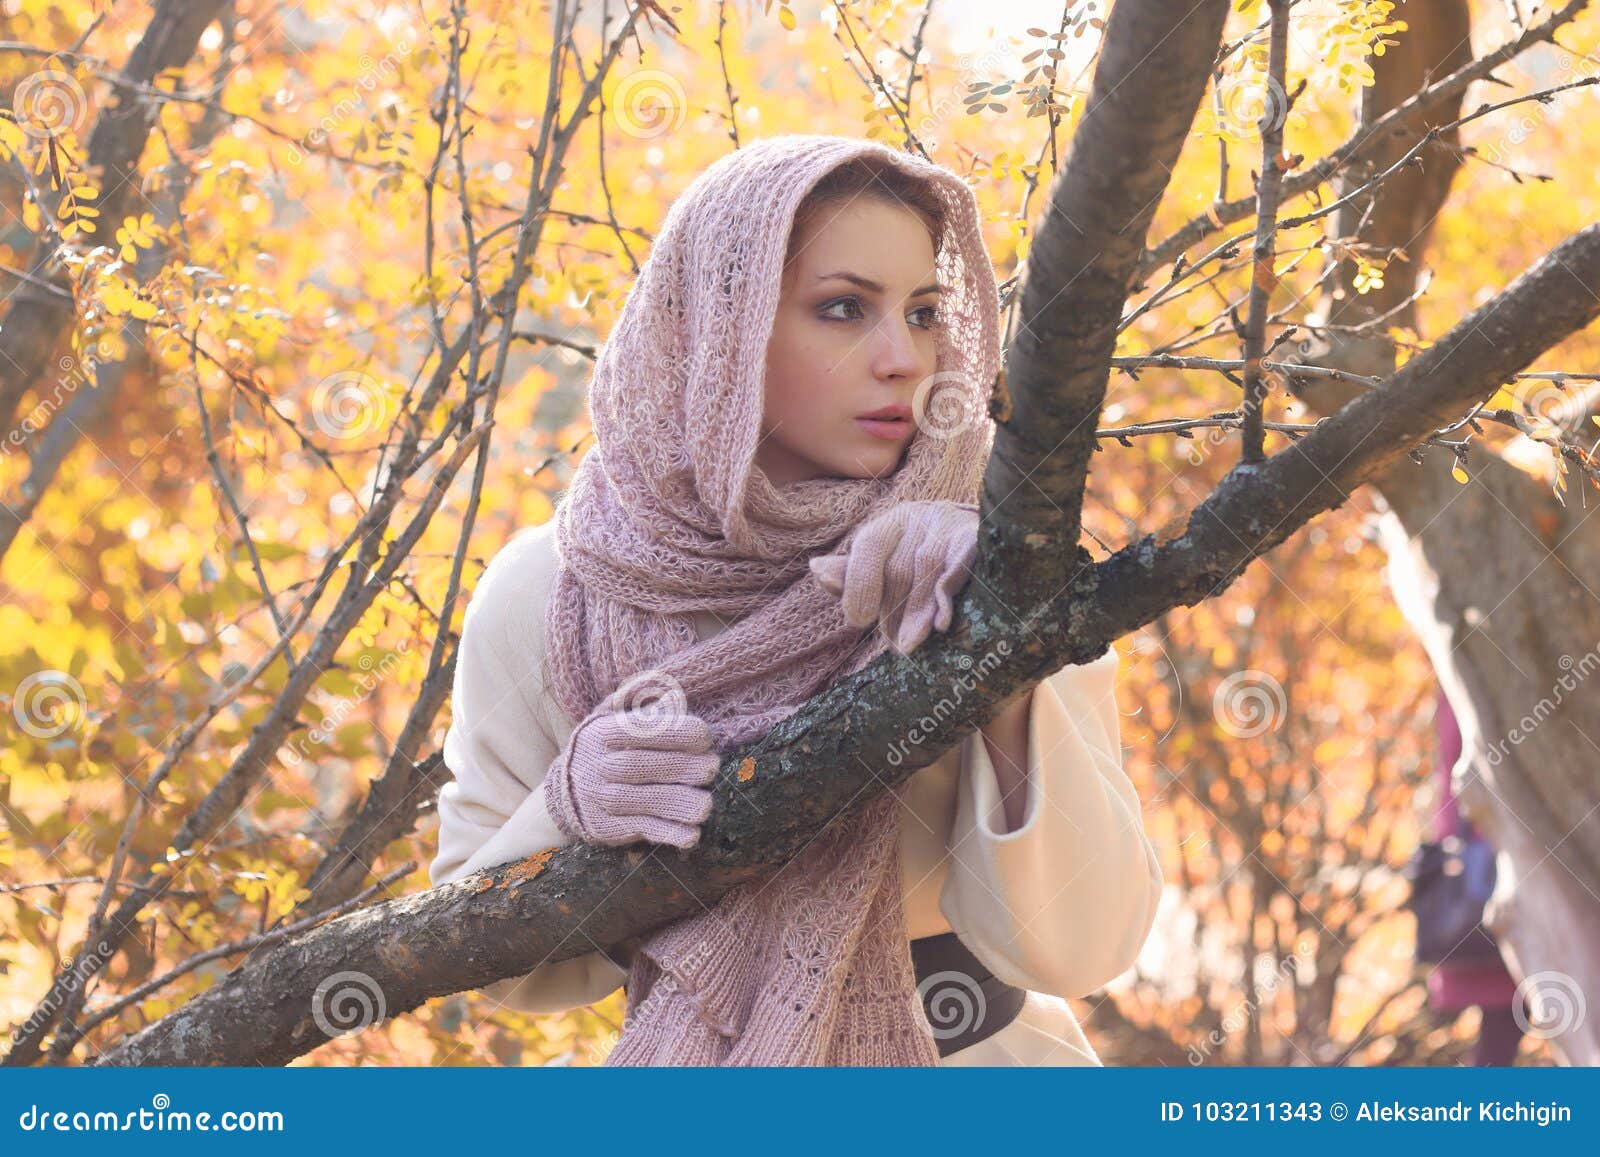 Girl in a Park Wear a Scarf Autumn Stock Image - Image of autumn, happy ...